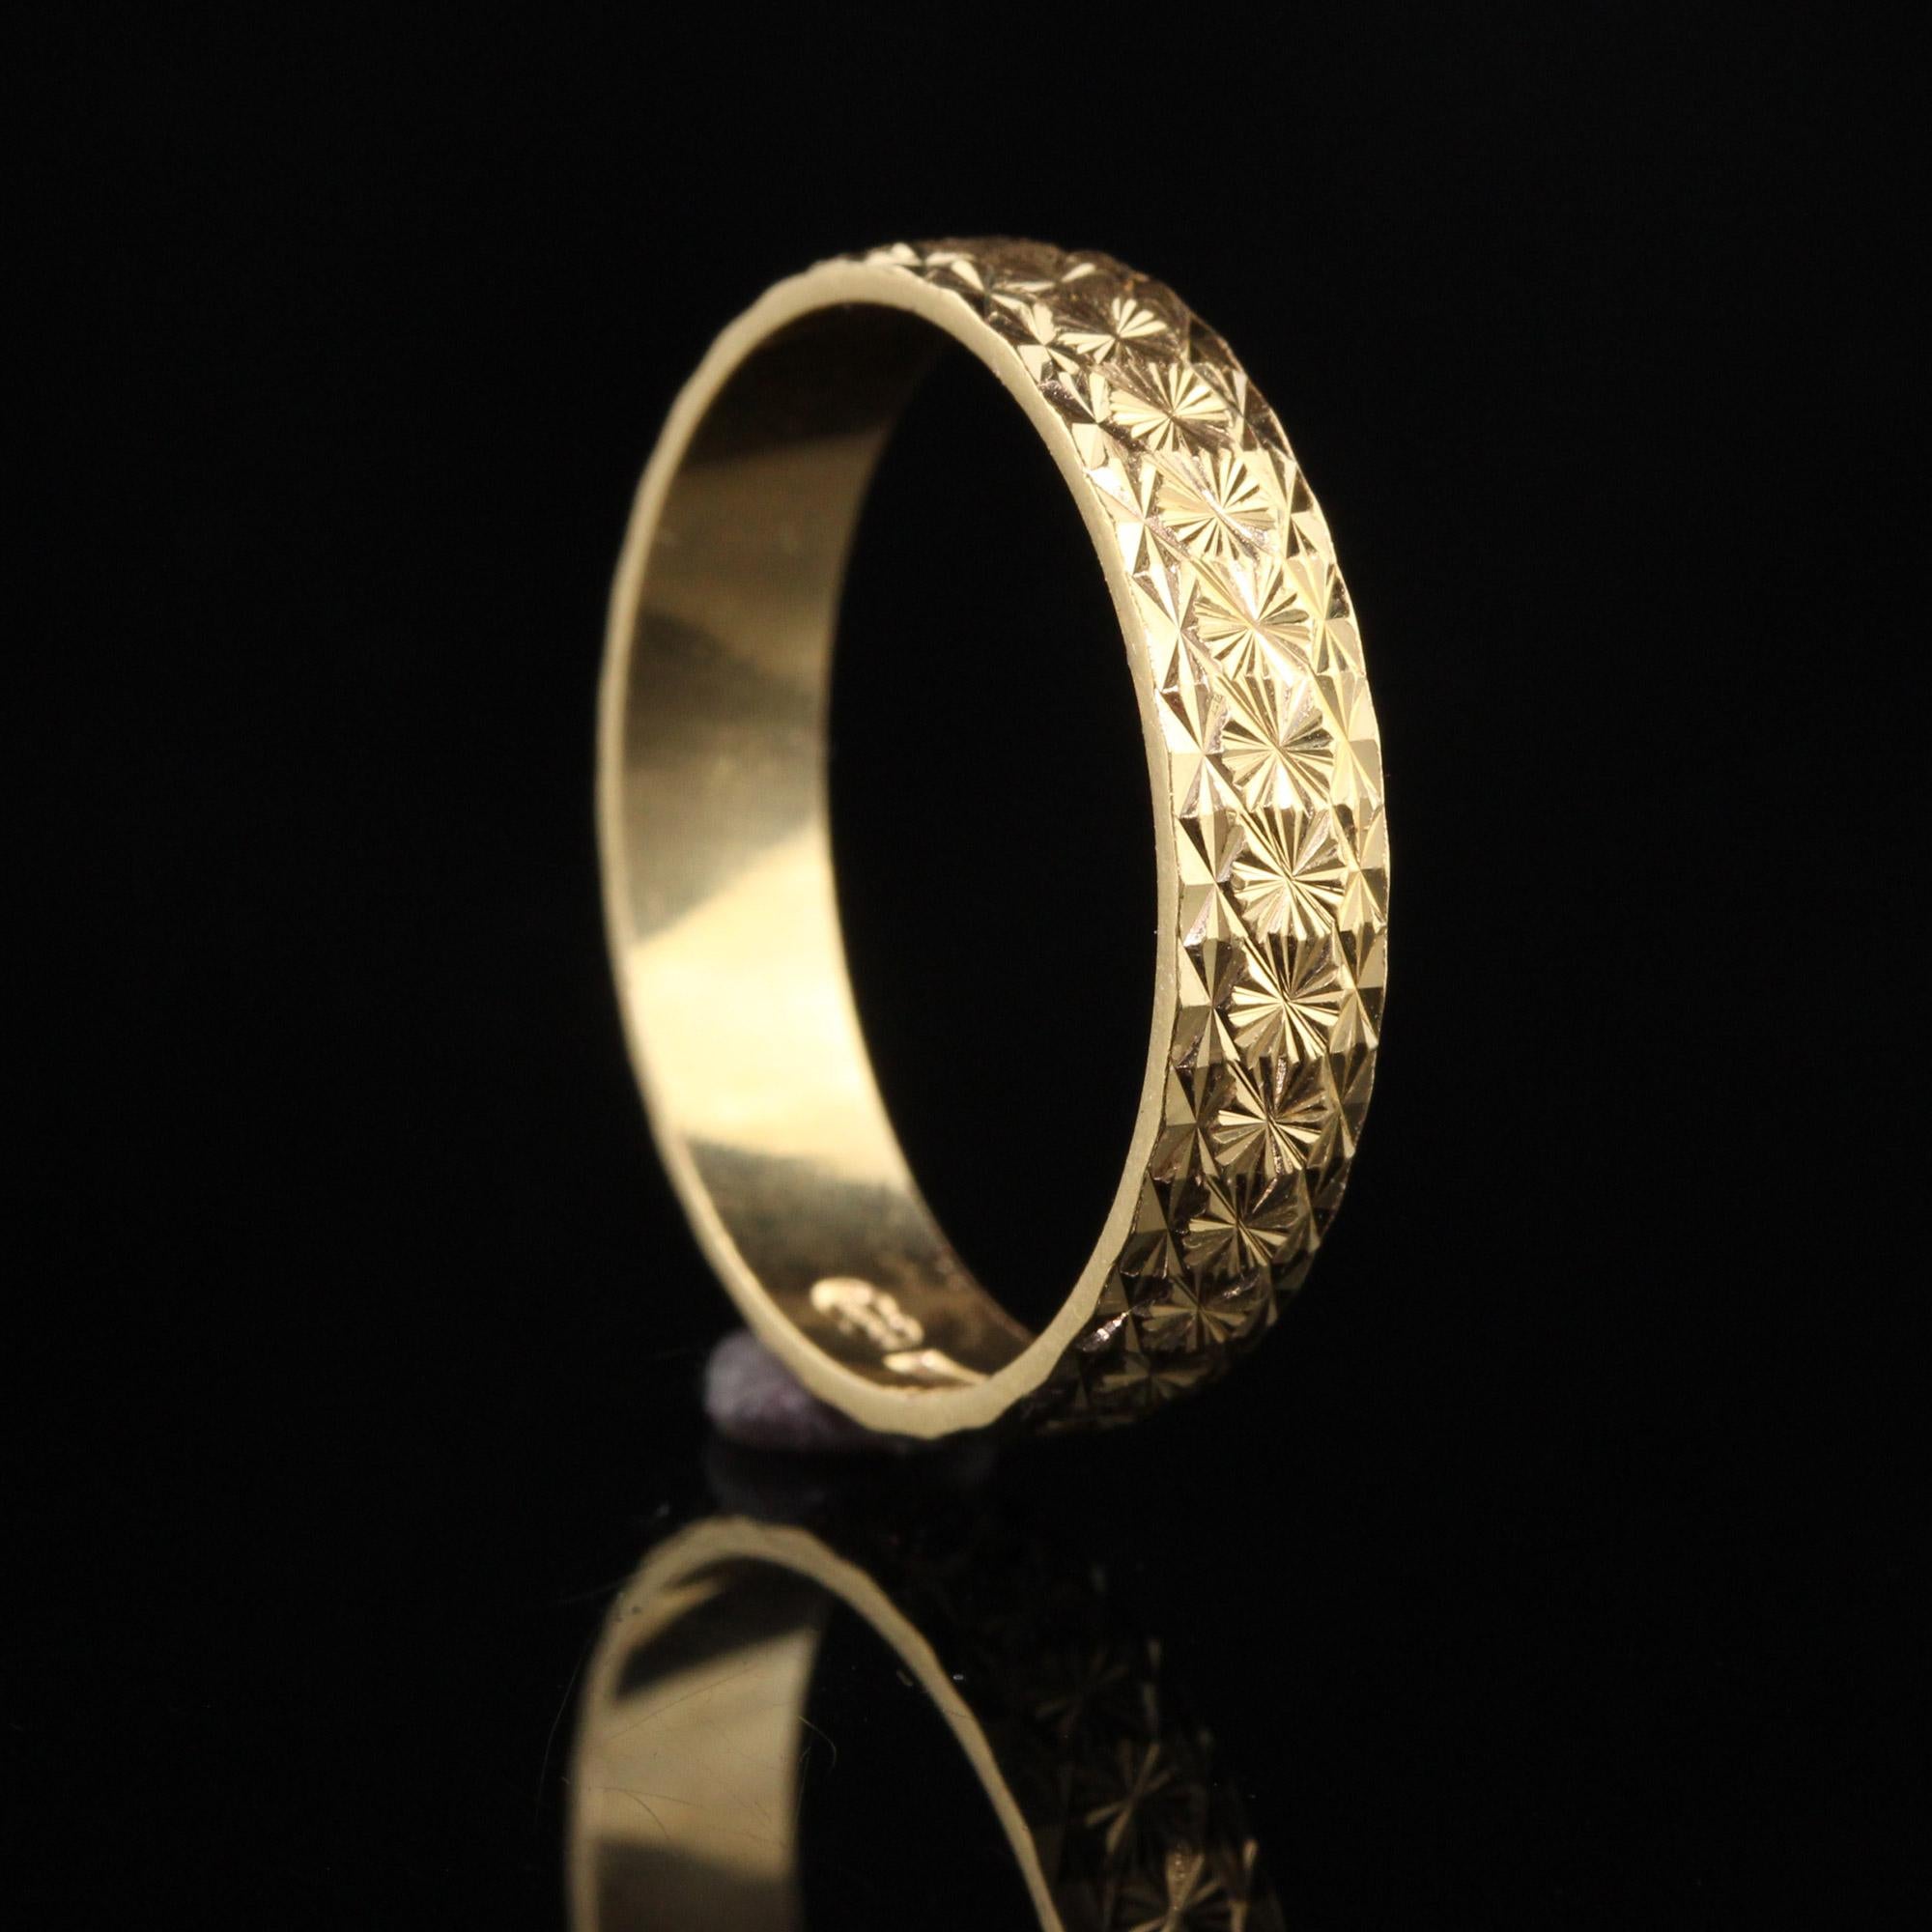 Estate Vintage 18K Yellow Gold Engraved Wedding Band In Good Condition For Sale In Great Neck, NY